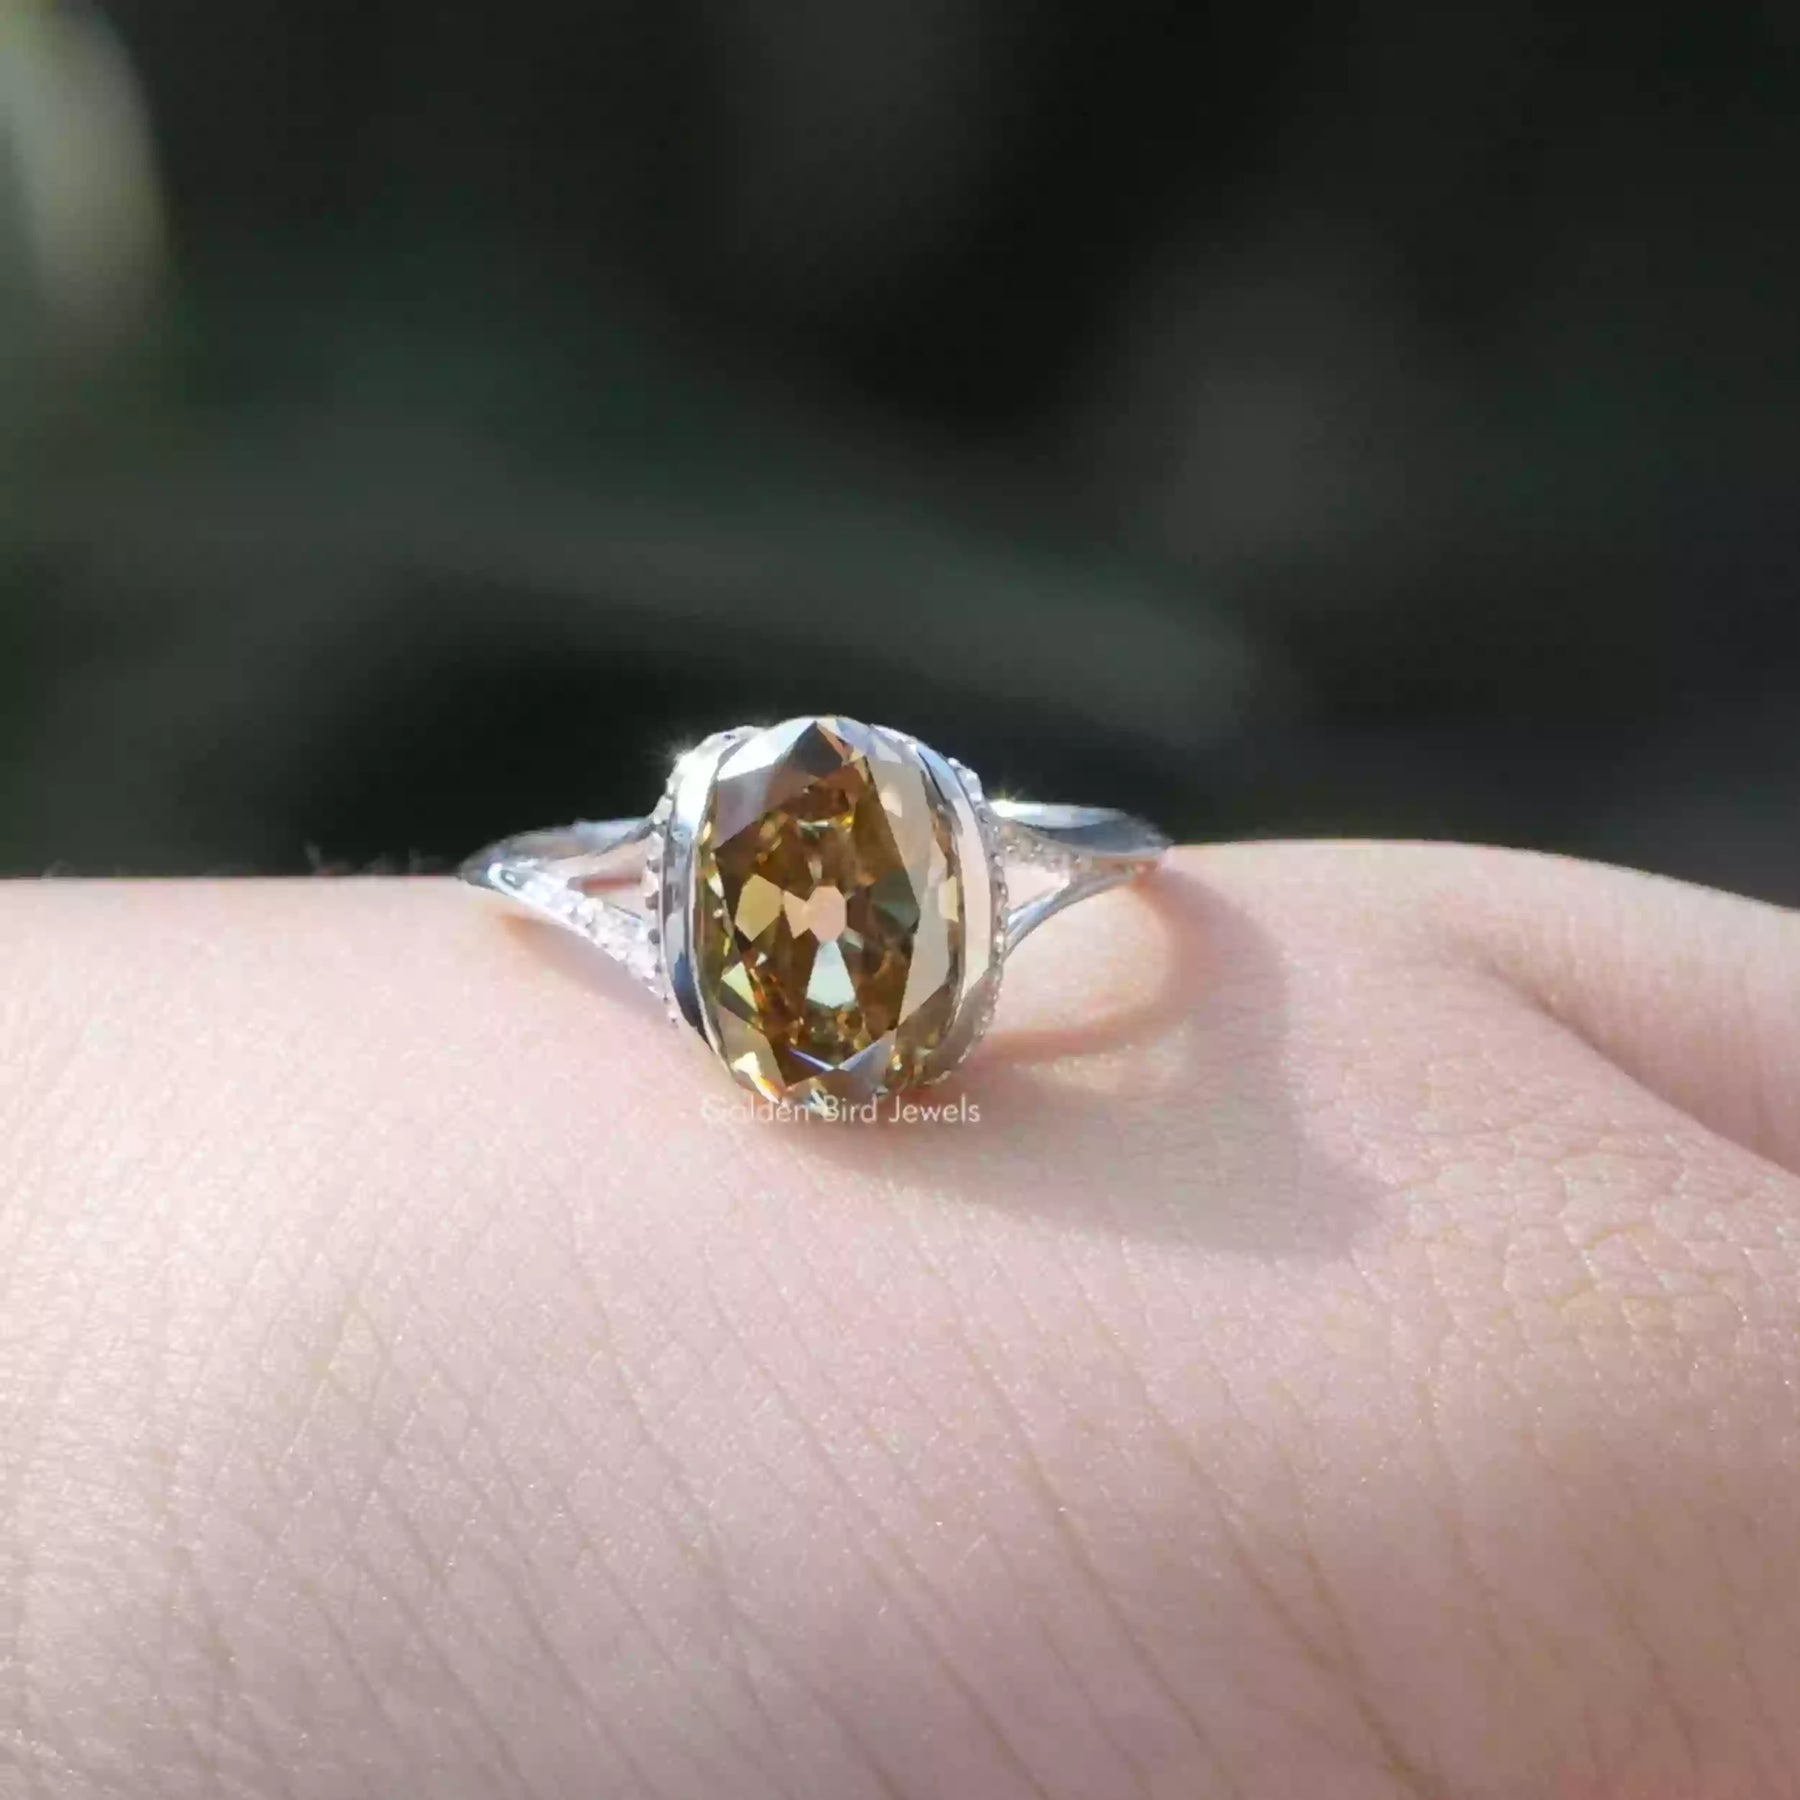 [Front view of brown old mine oval cut moissanite ring]-[Golden Bird Jewels]